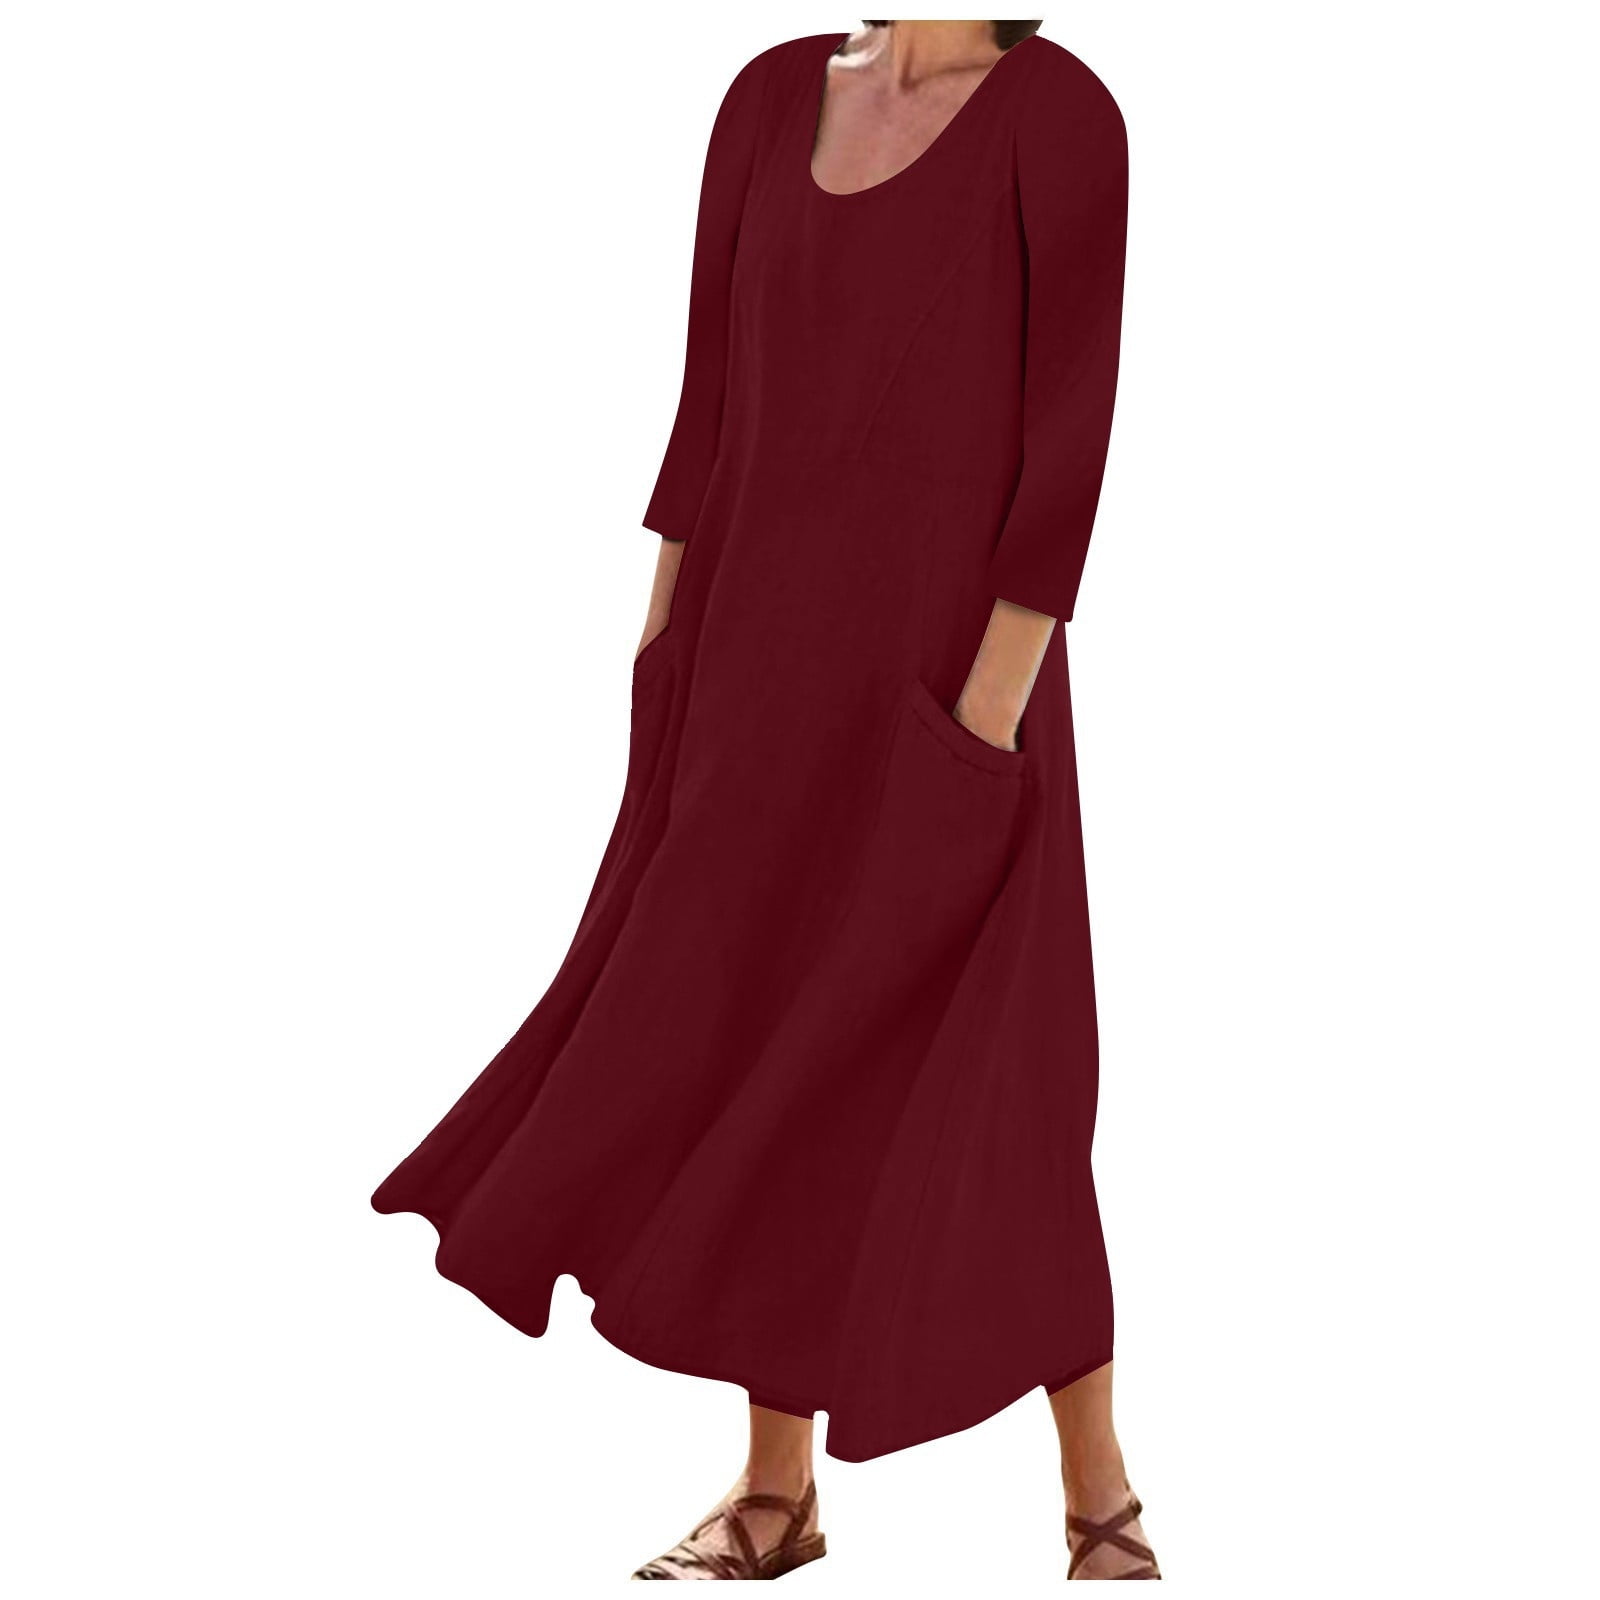 safuny Women's Tea Length Loose Cotton Dress Solid Color Holiday Round Neck  Elegant Casual Daily Comfy Trendy Dresses Long Sleeve Wine L 